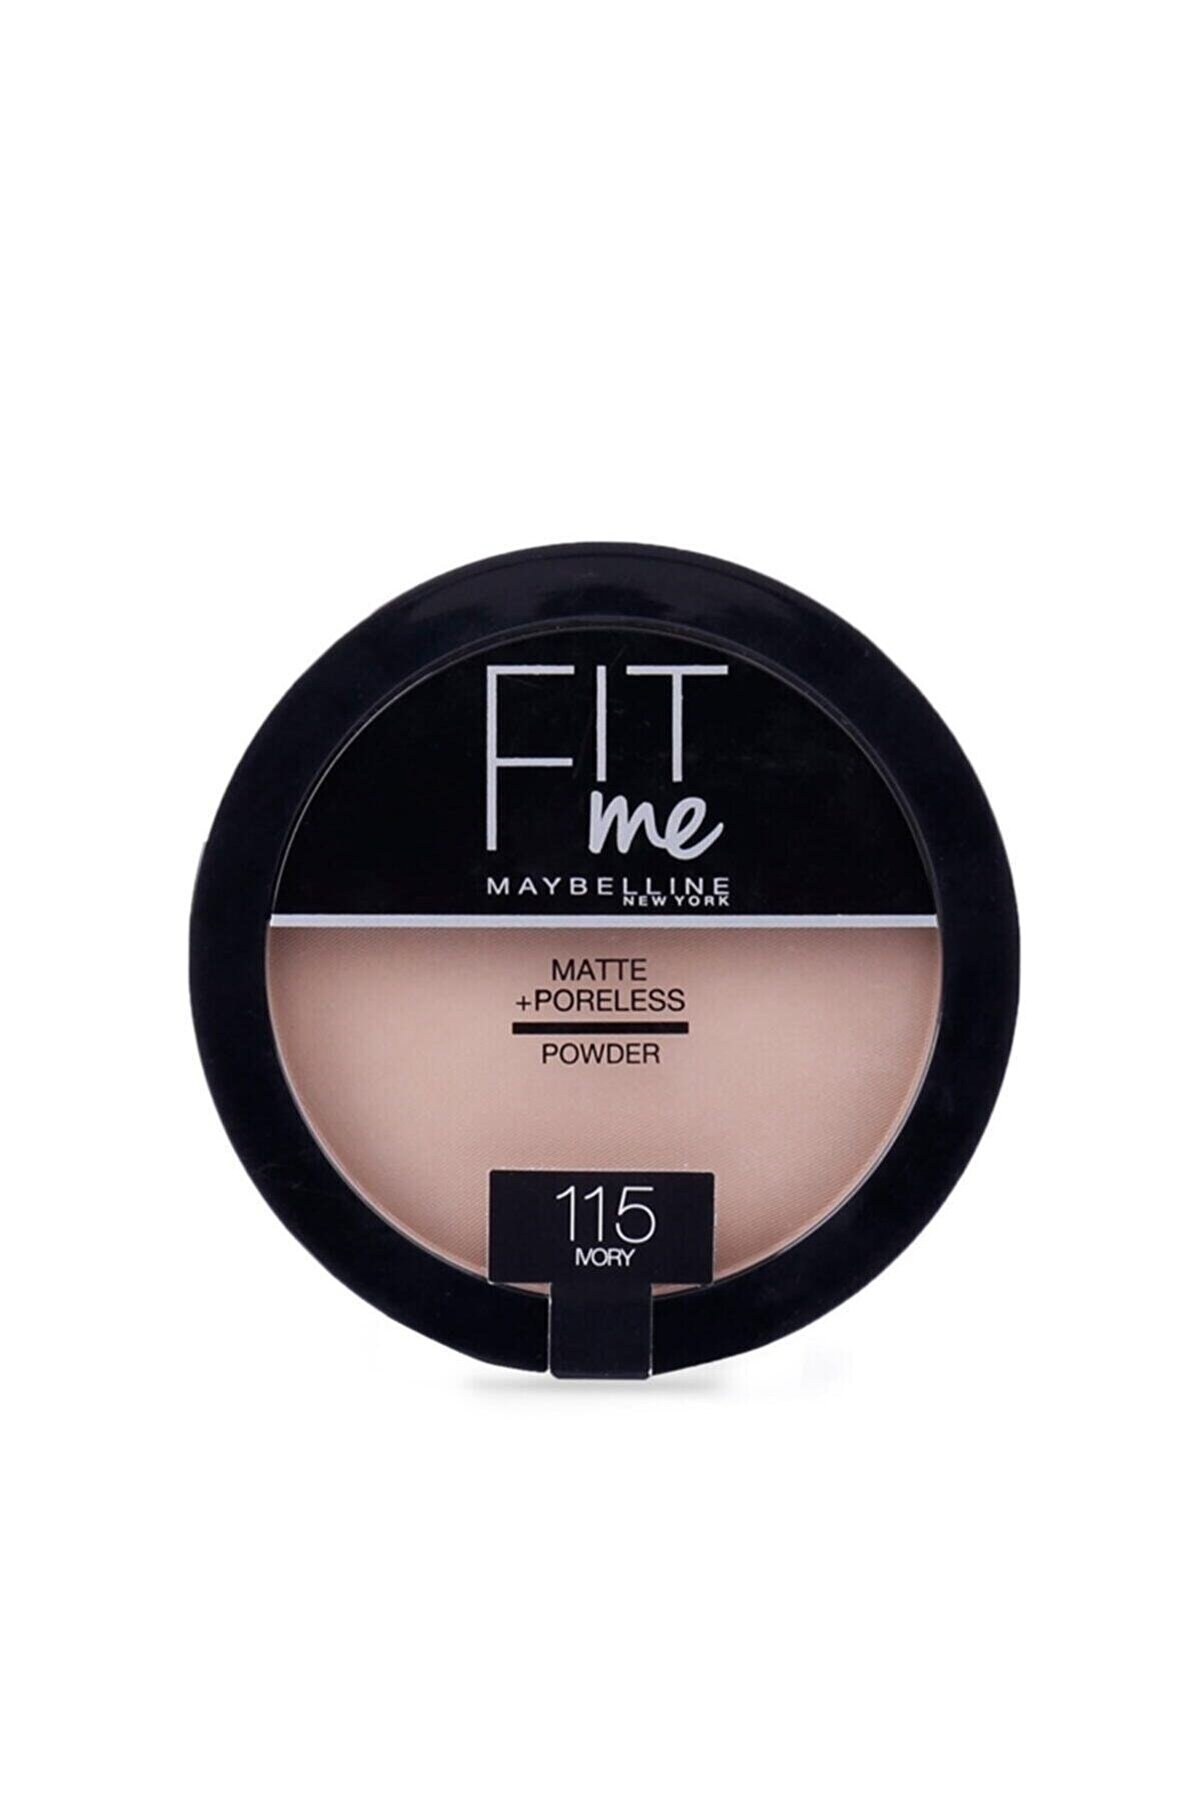 Maybelline New York Fit Me Matte+poreless Pudra - 115 Ivory